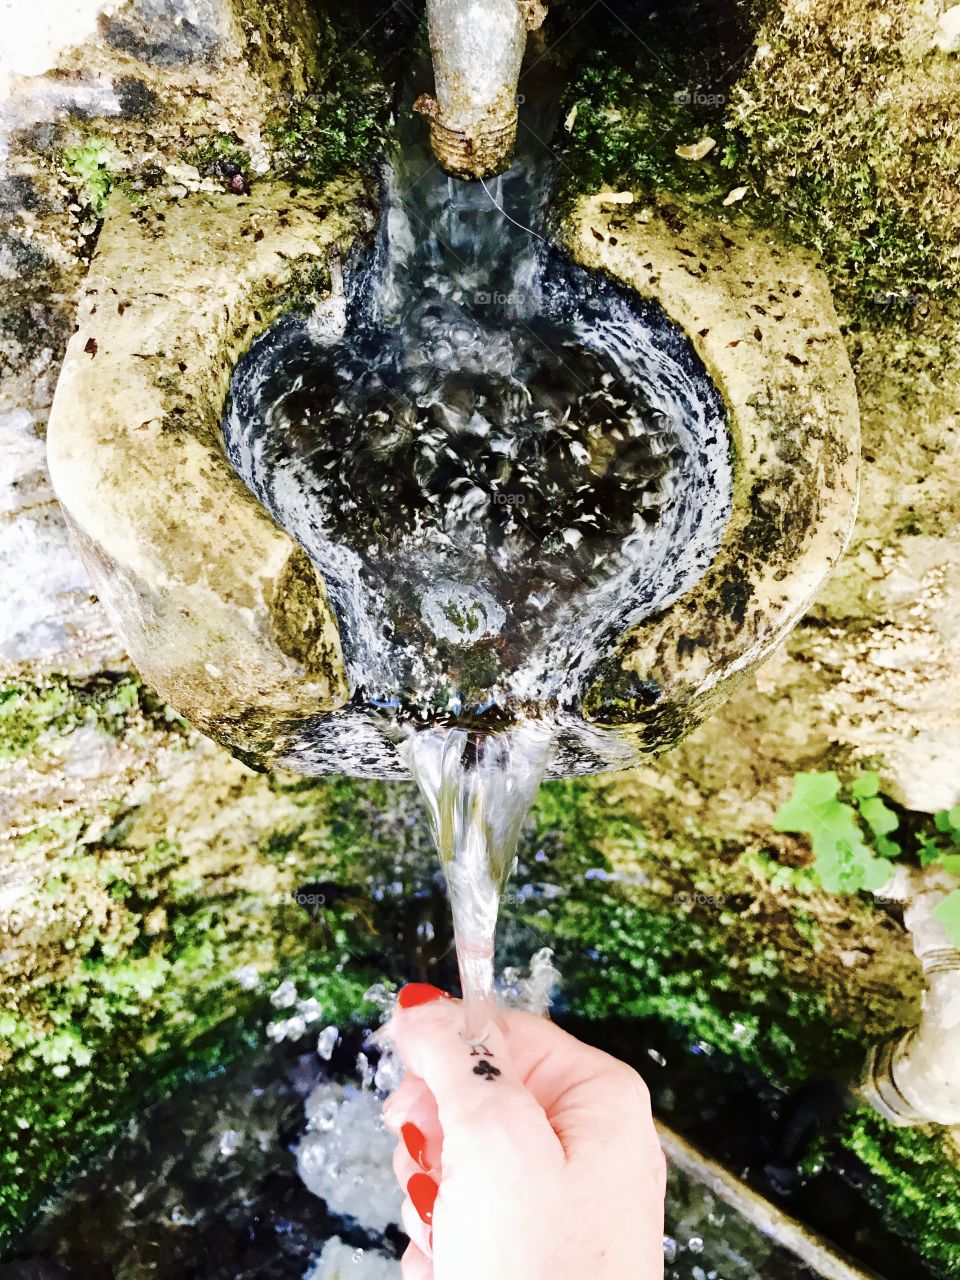 Fresh water from a spring